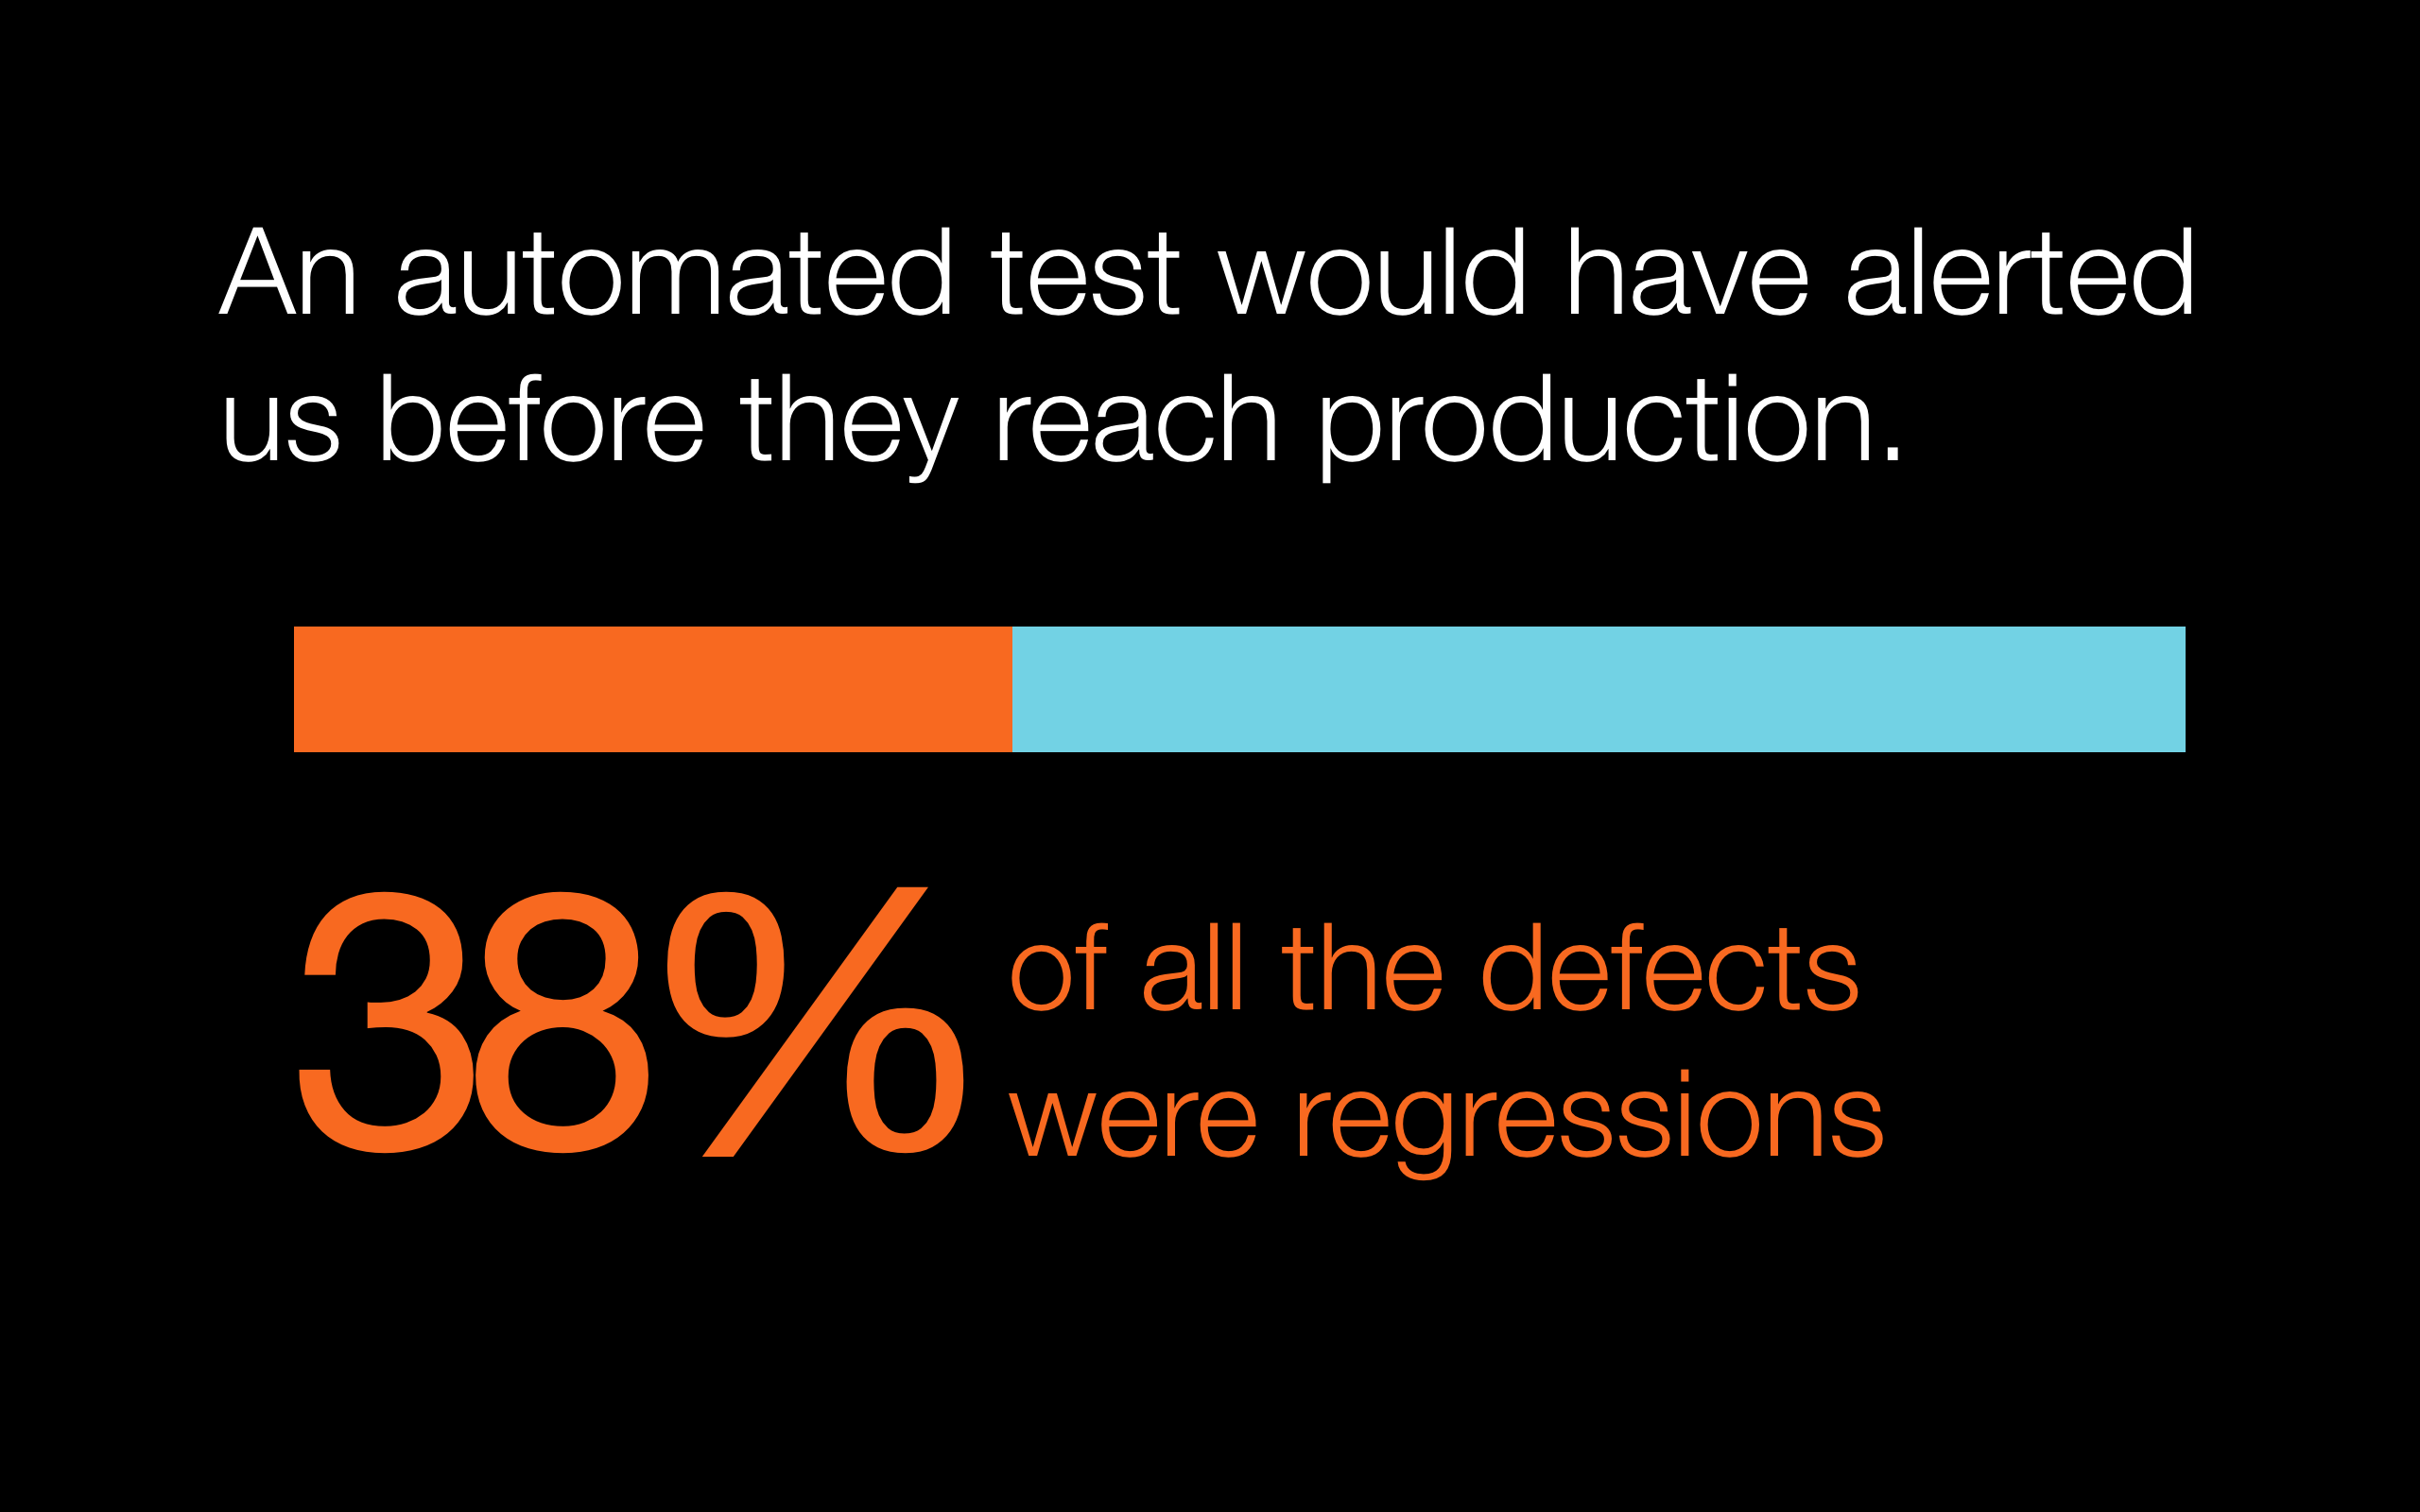 Lack of automated tests led to 38% of the defects